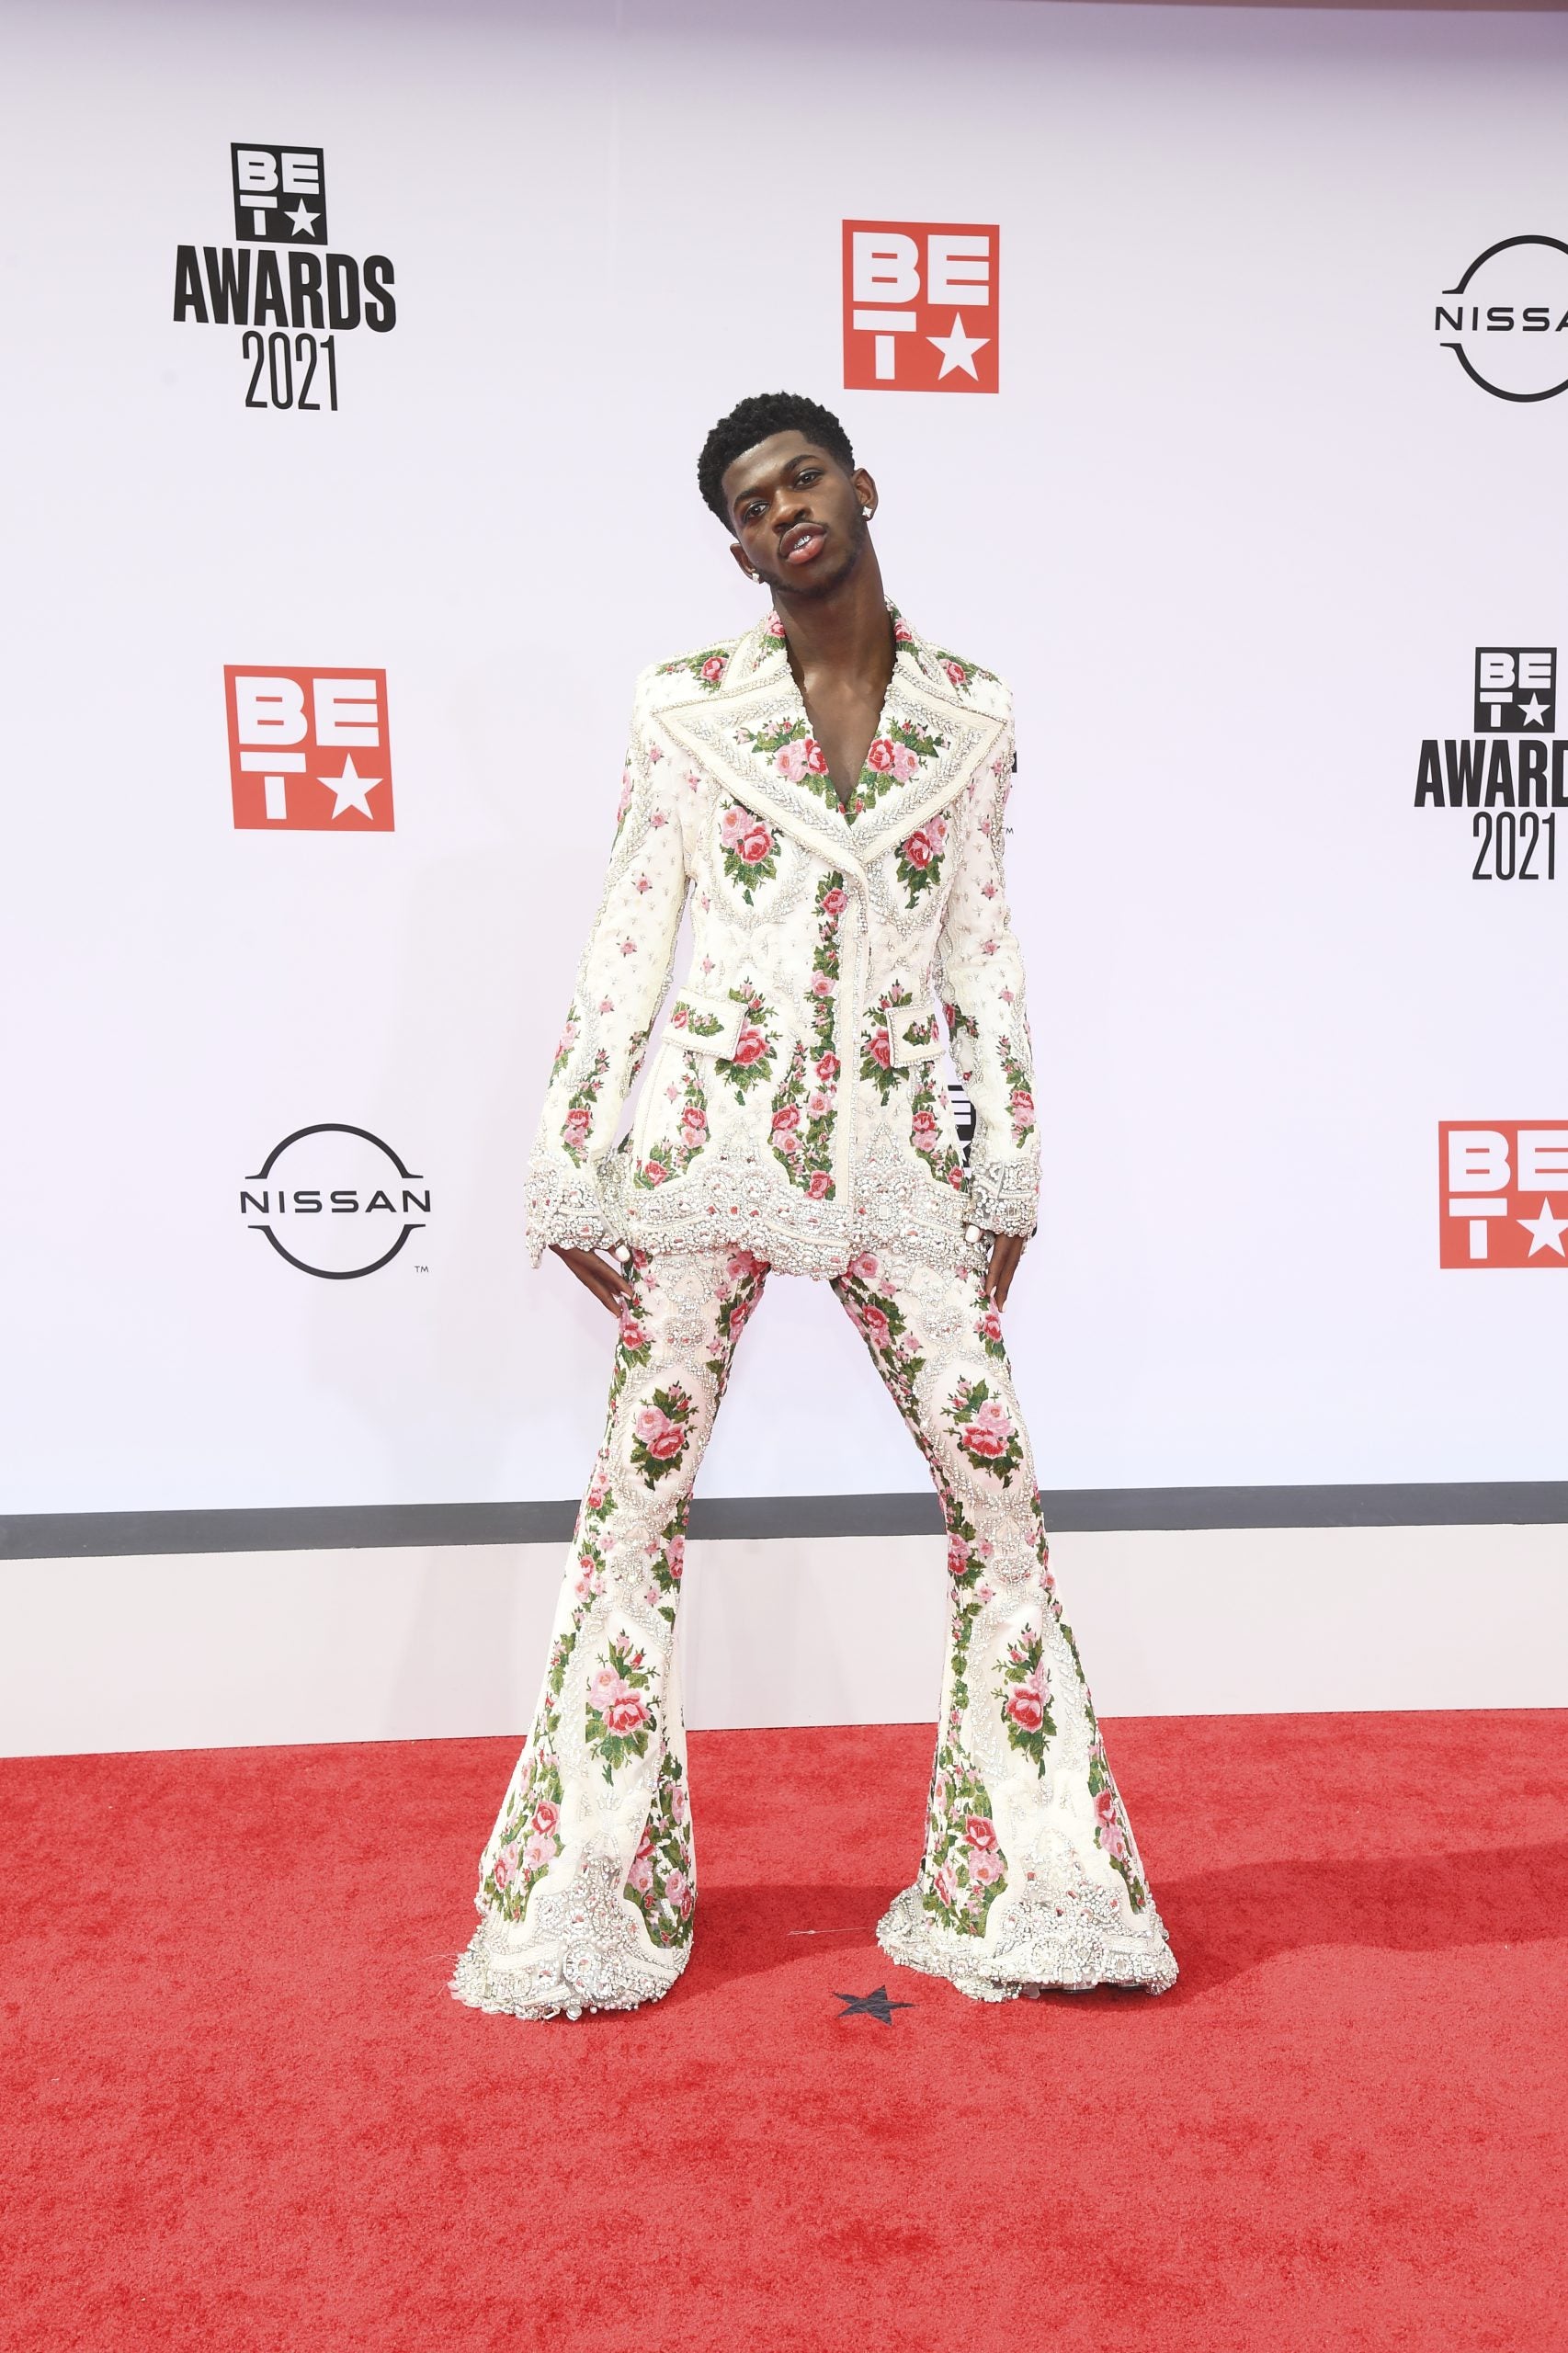 Celebrate Lil Nas X’s Bday Through Some Of His Best Looks | Essence